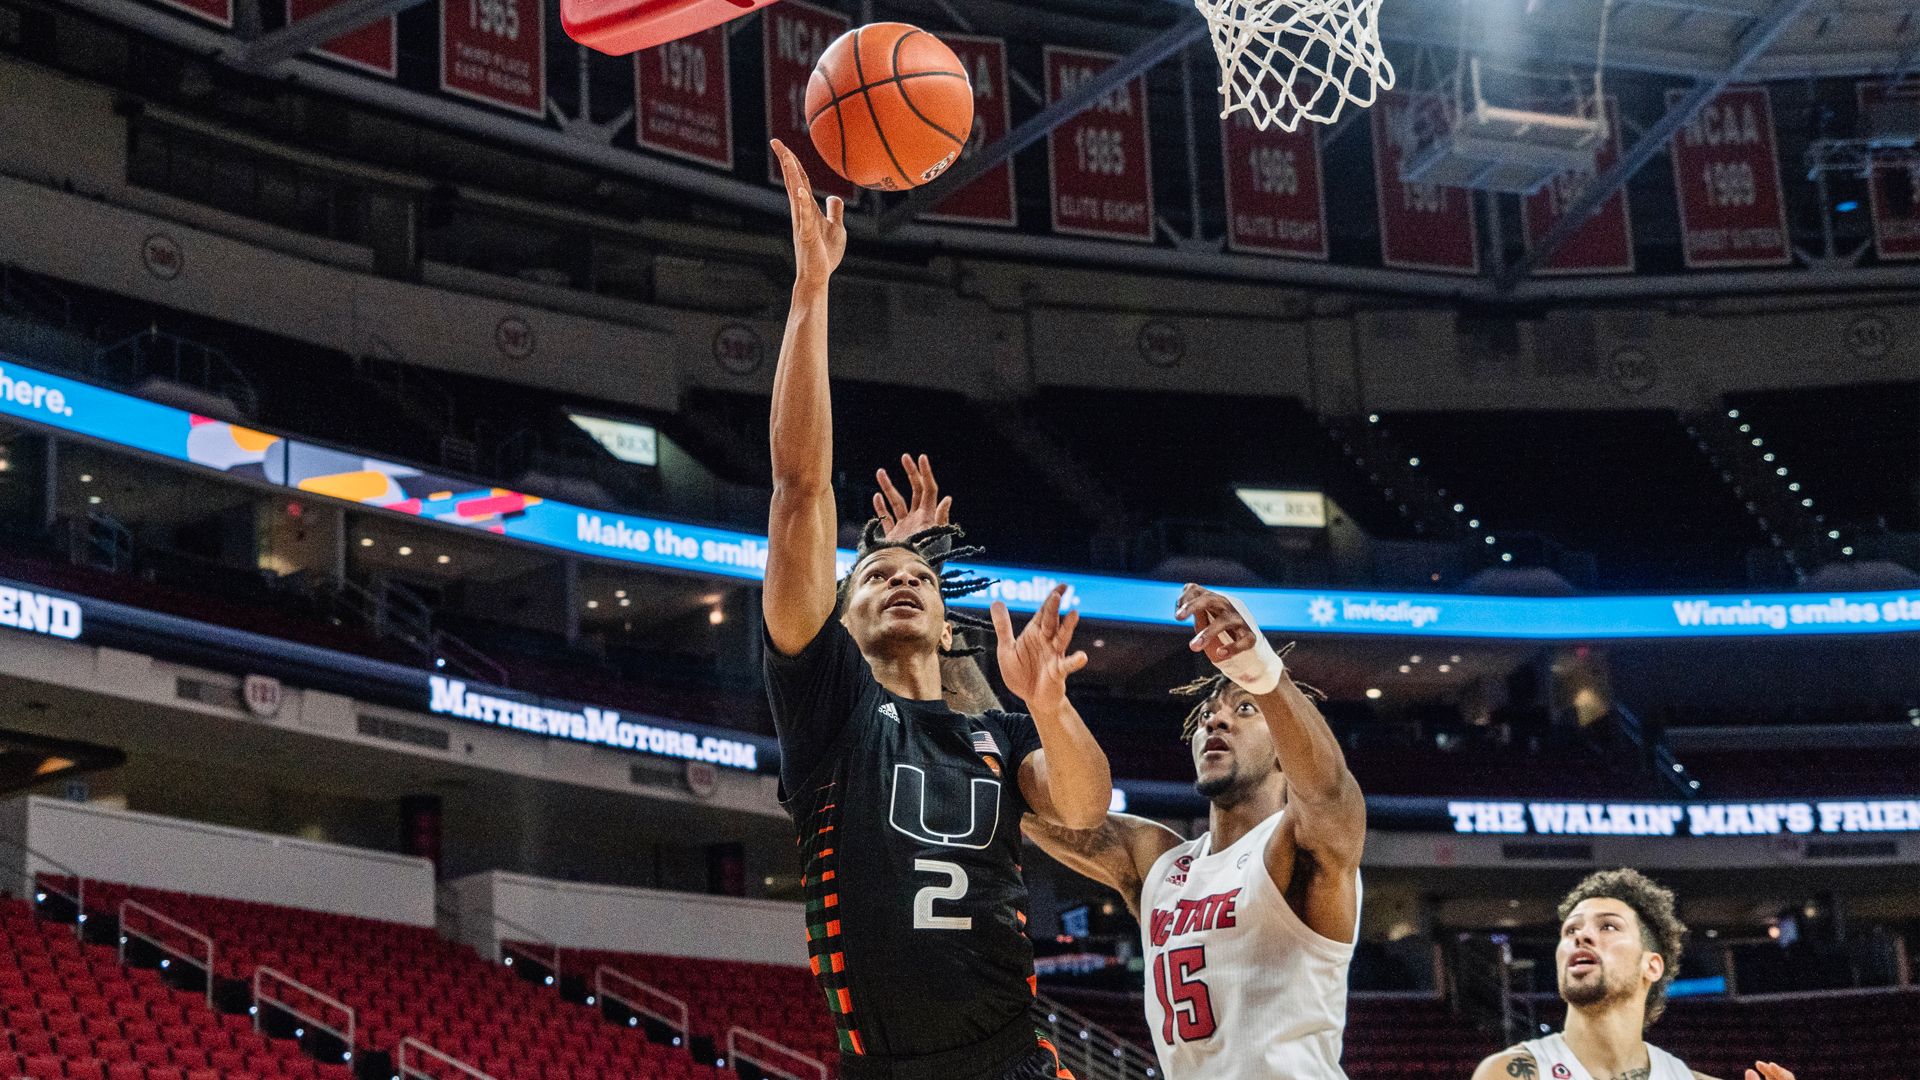 MBB Notches 64-59 Road Win at NC State